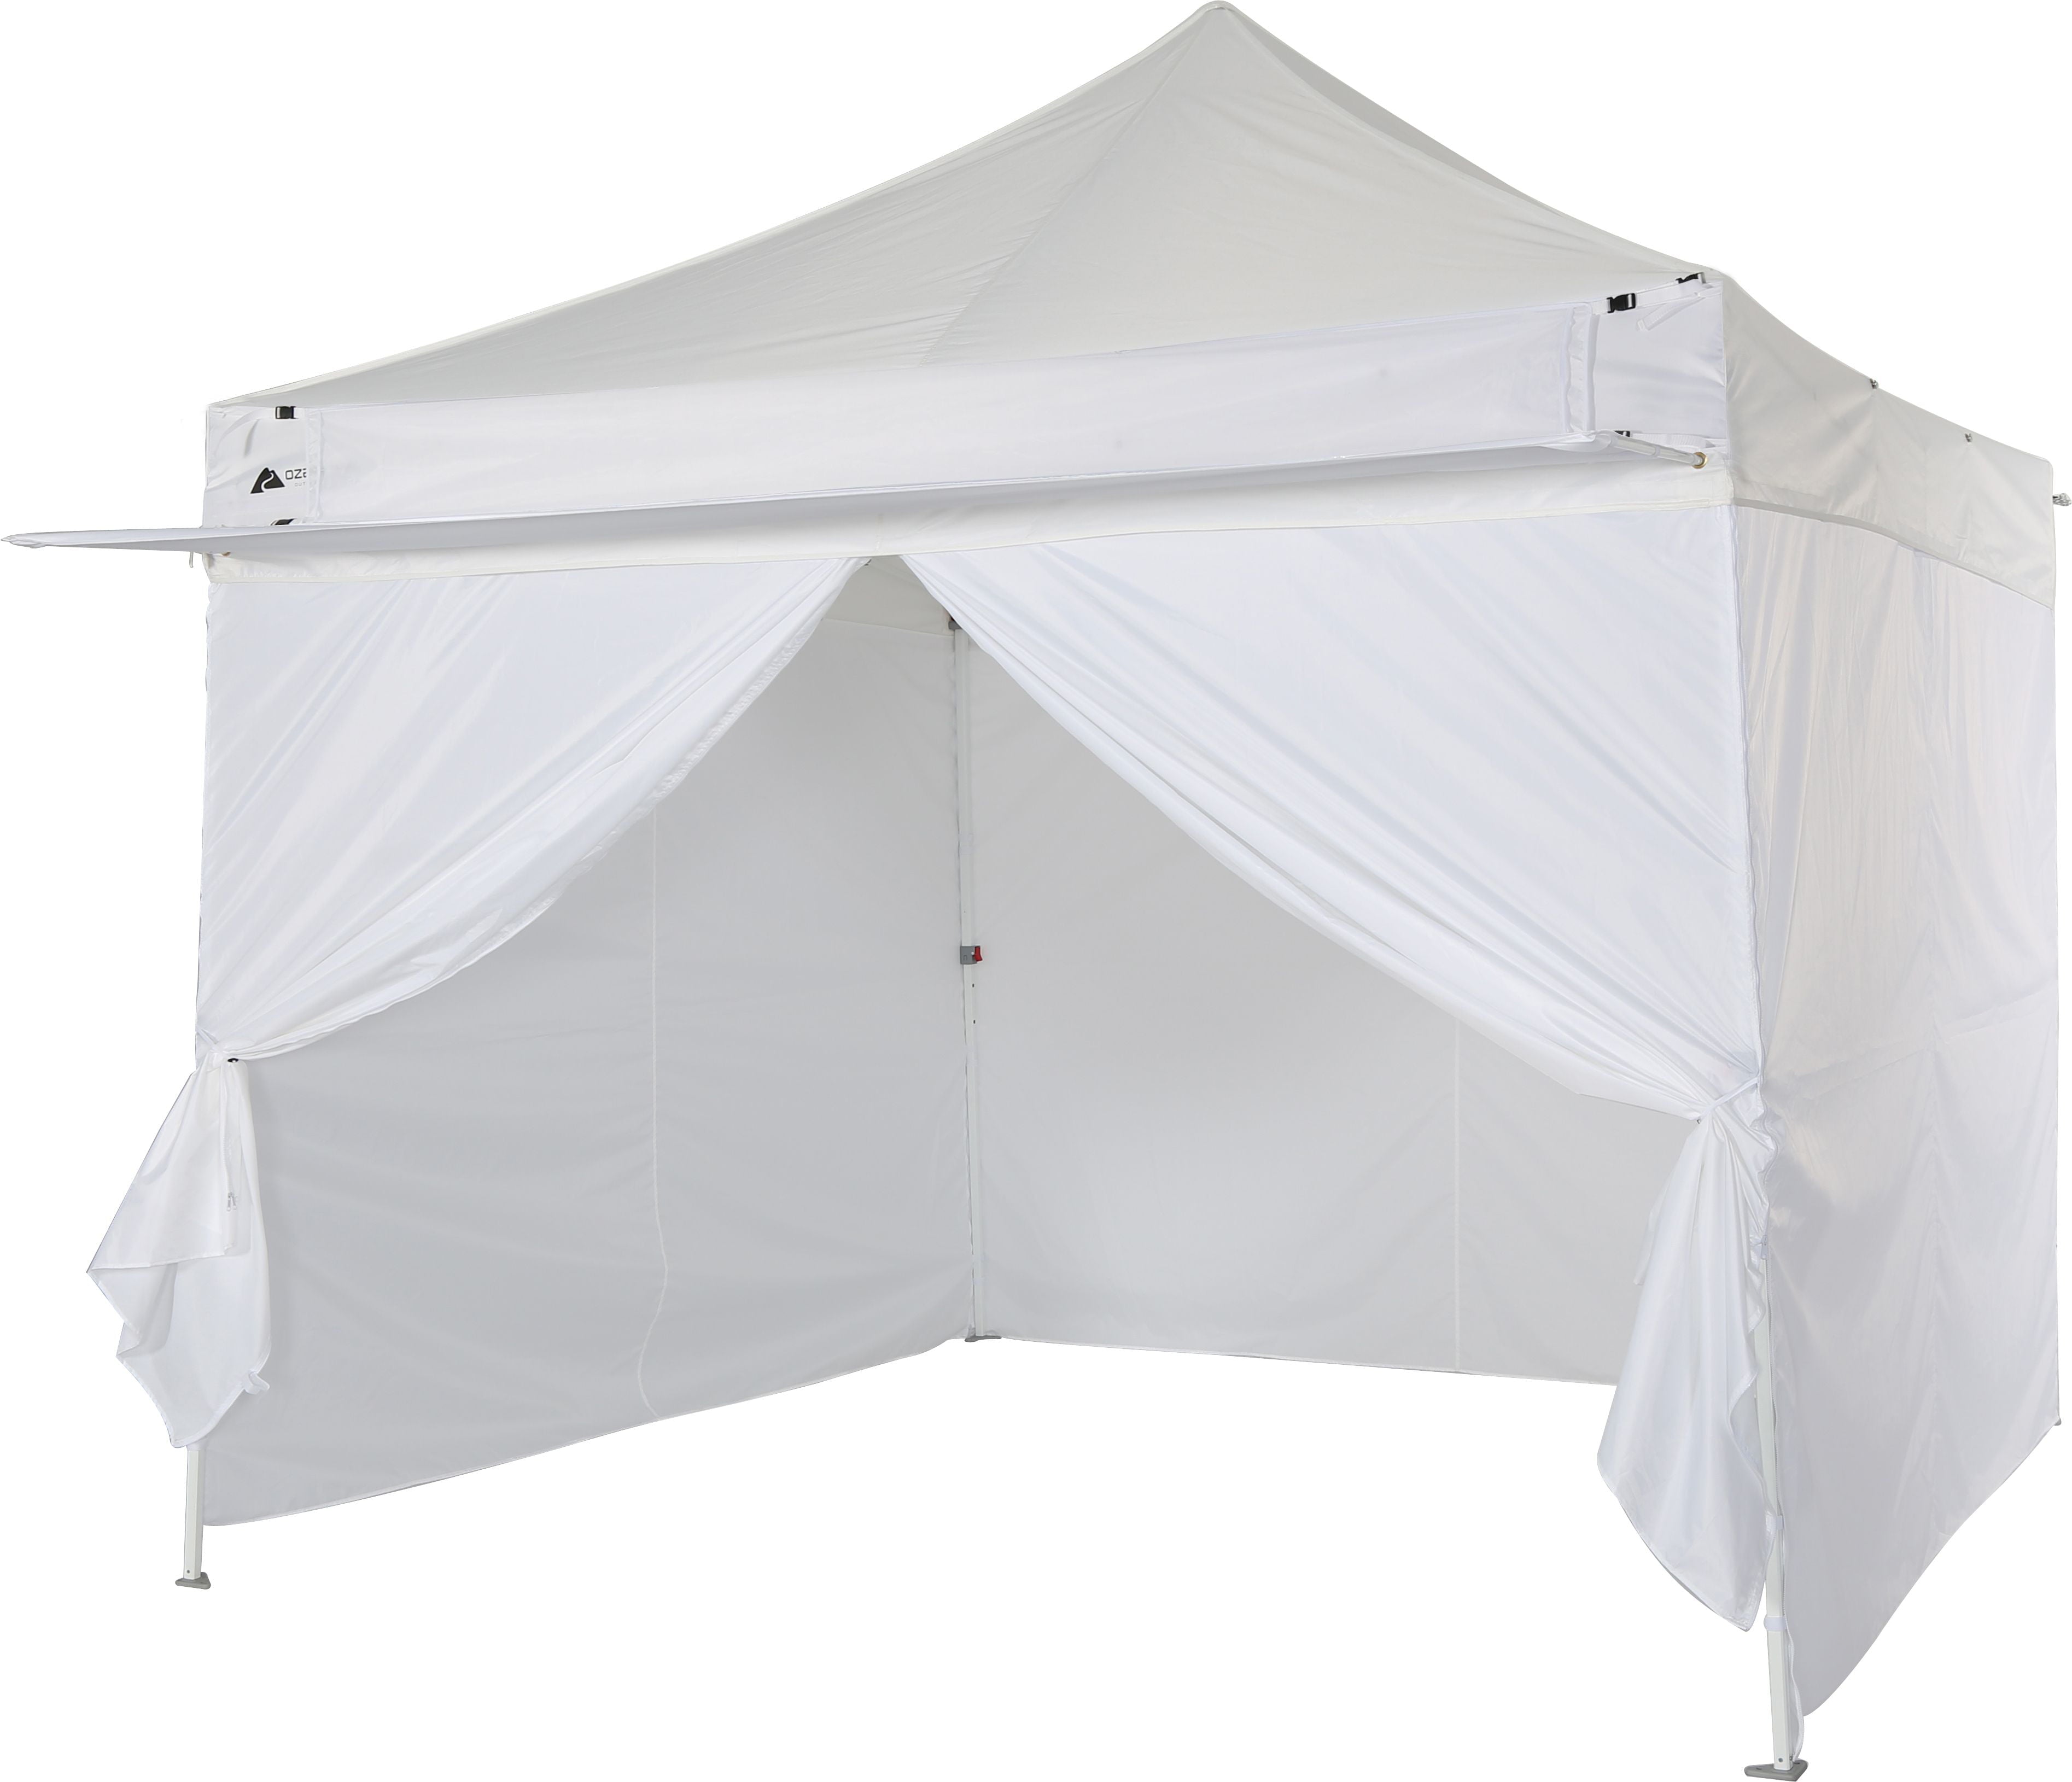 Ozark Trail 10' x 10' White Commercial Instant Canopy with Sidewalls